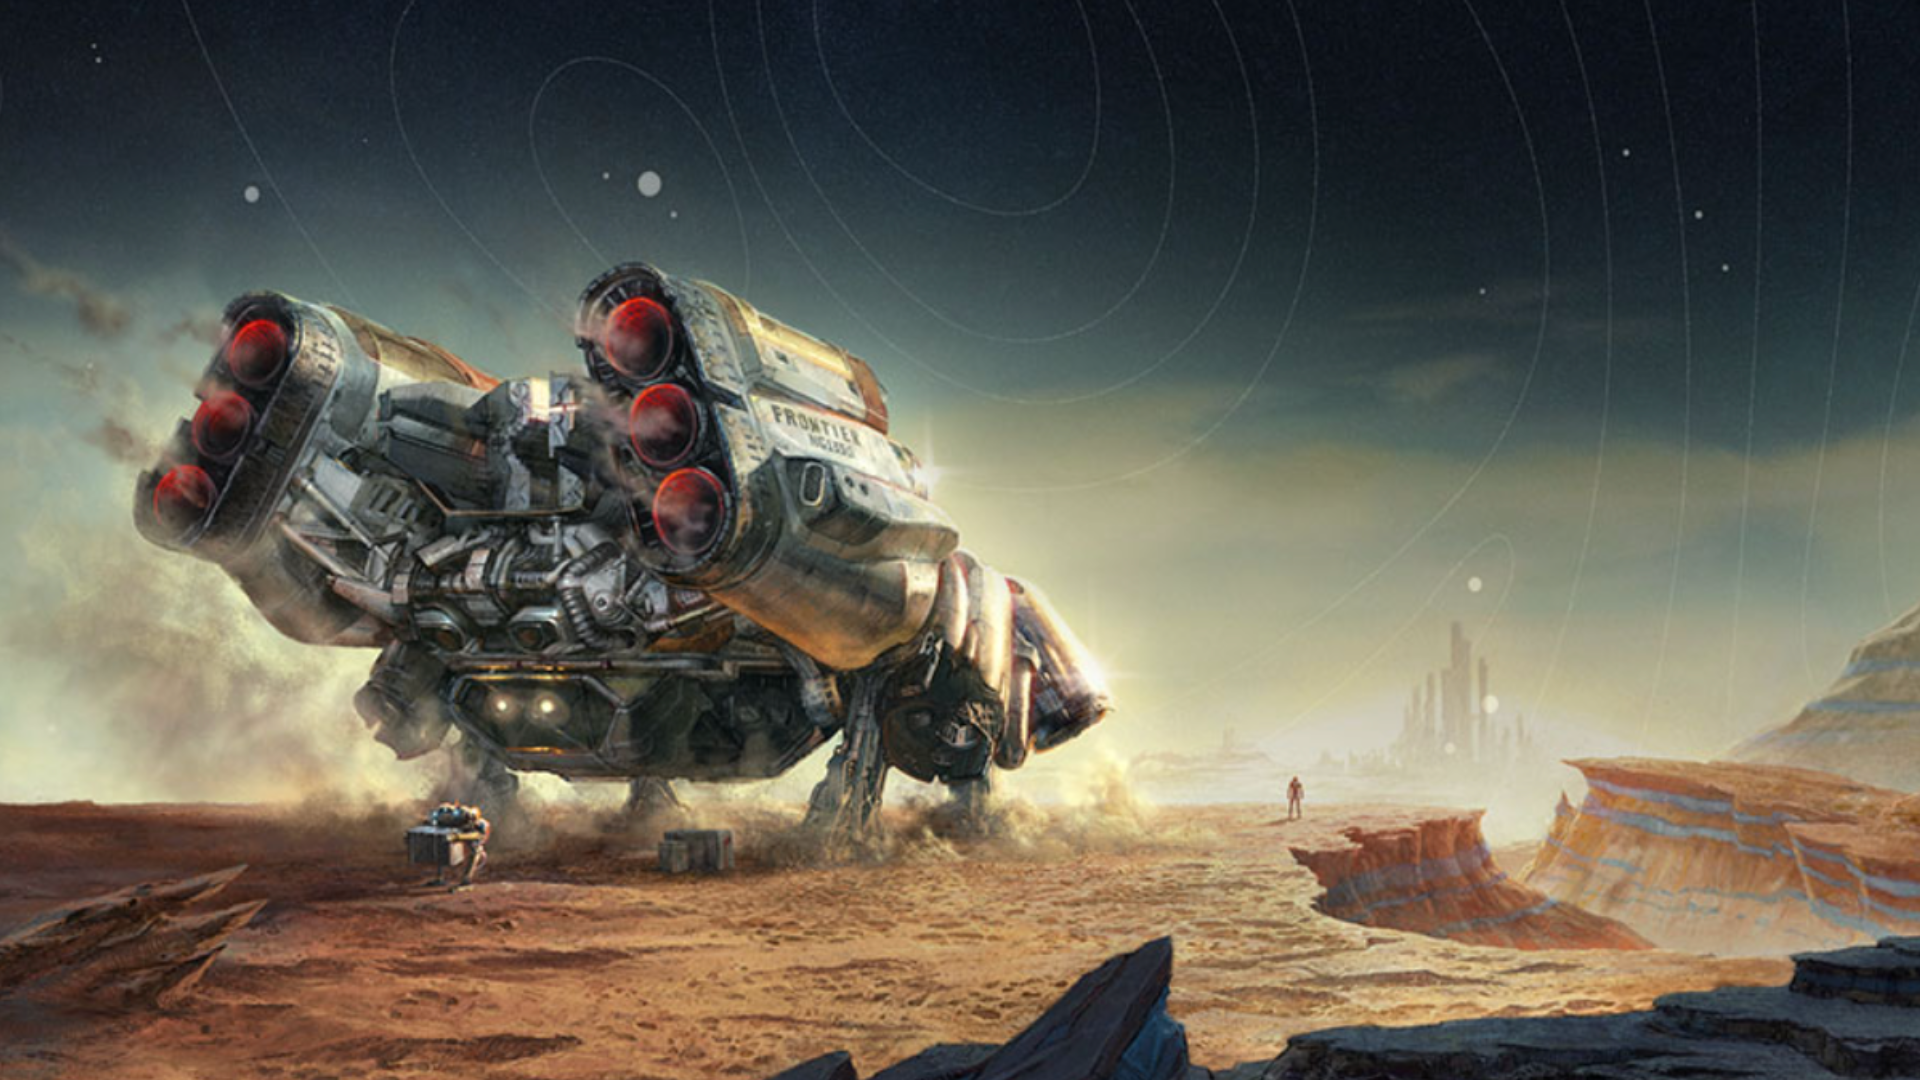 A futuristic spaceship landed on a barren, alien landscape with rocky outcrops and a distant city skyline under a starry sky, highlighting the sci-fi and exploration themes of the game "Starfield."